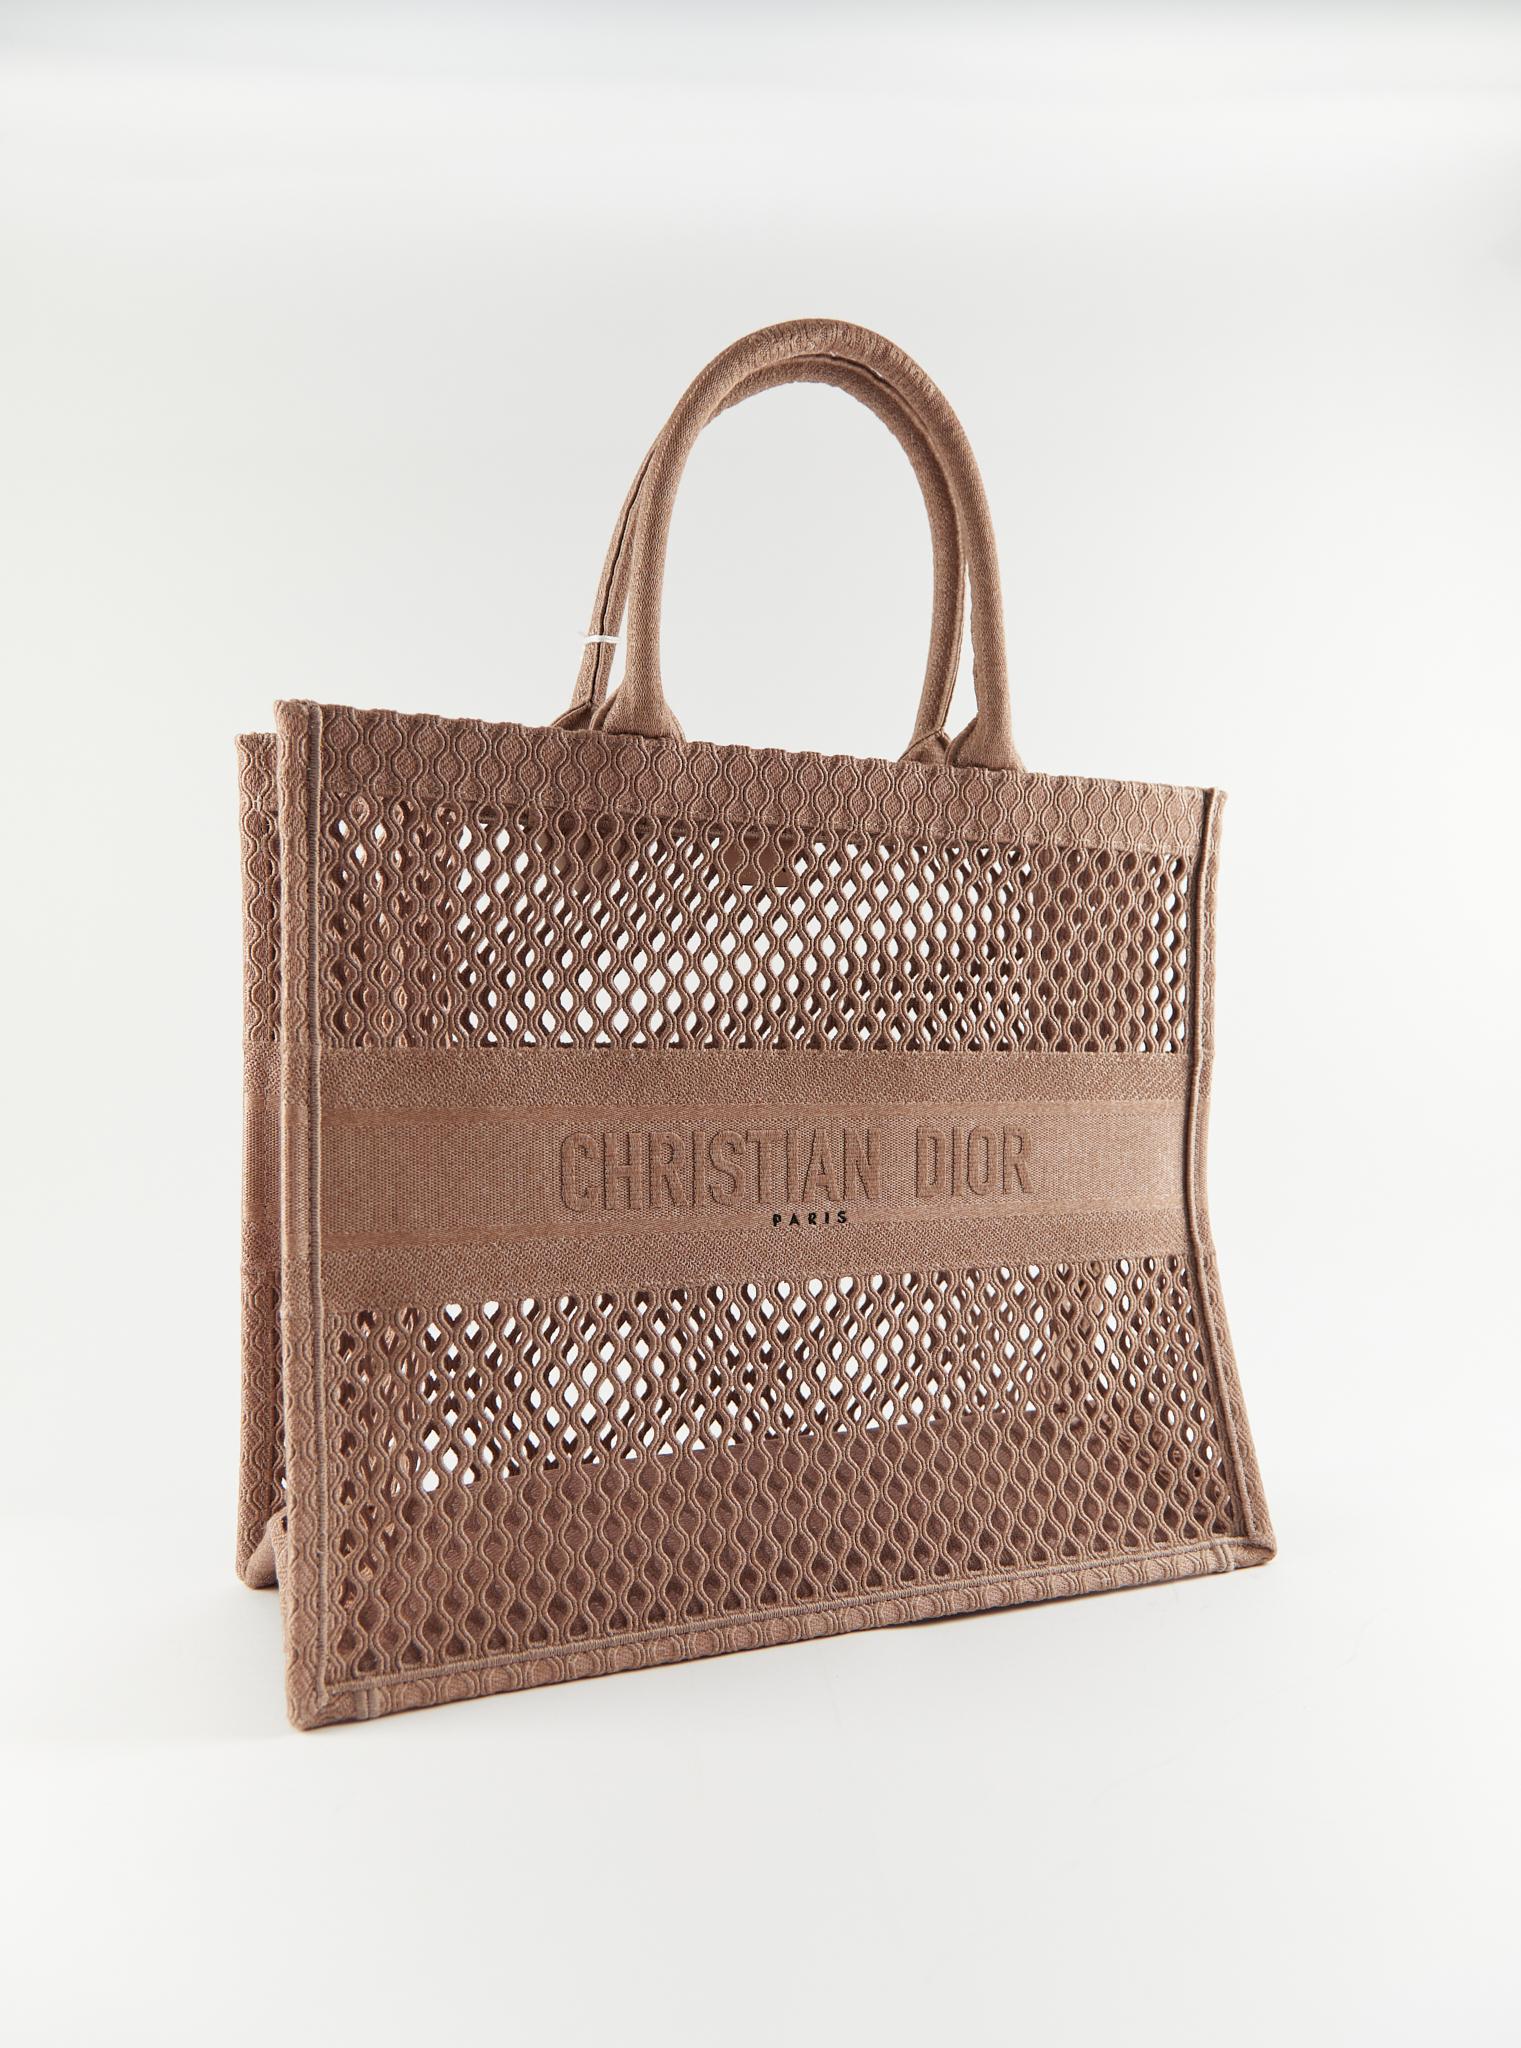 DIOR PERFORATED BOOK TOTE Blush Pink In New Condition For Sale In London, GB